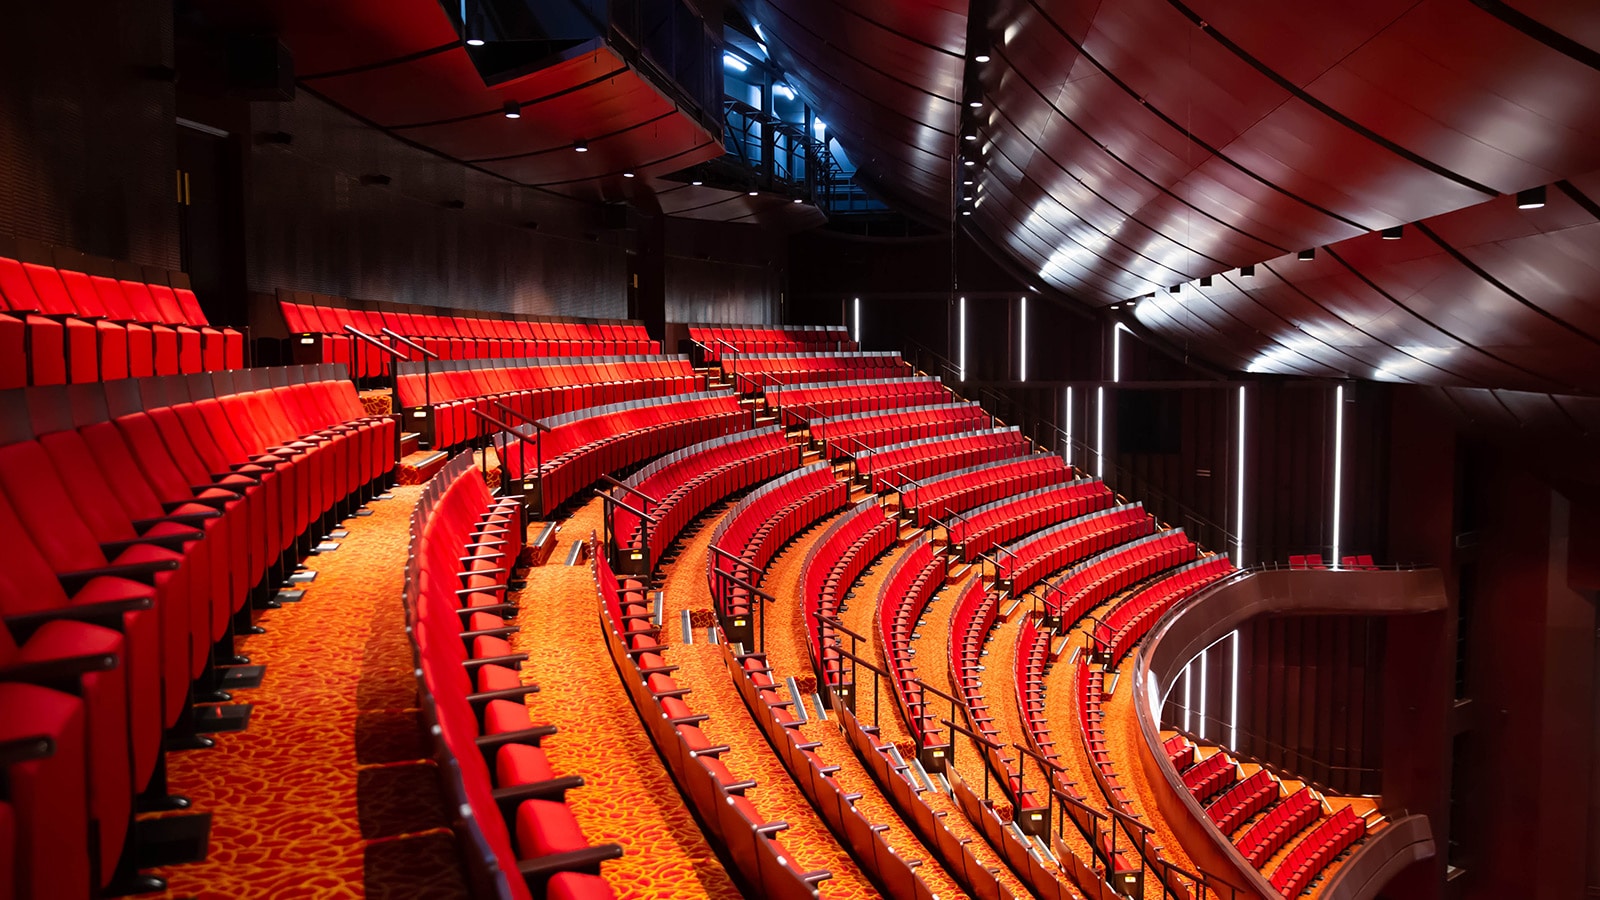 Meyer Sound Constellation Plays a Starring Acoustical Role at New Jakarta Theatre